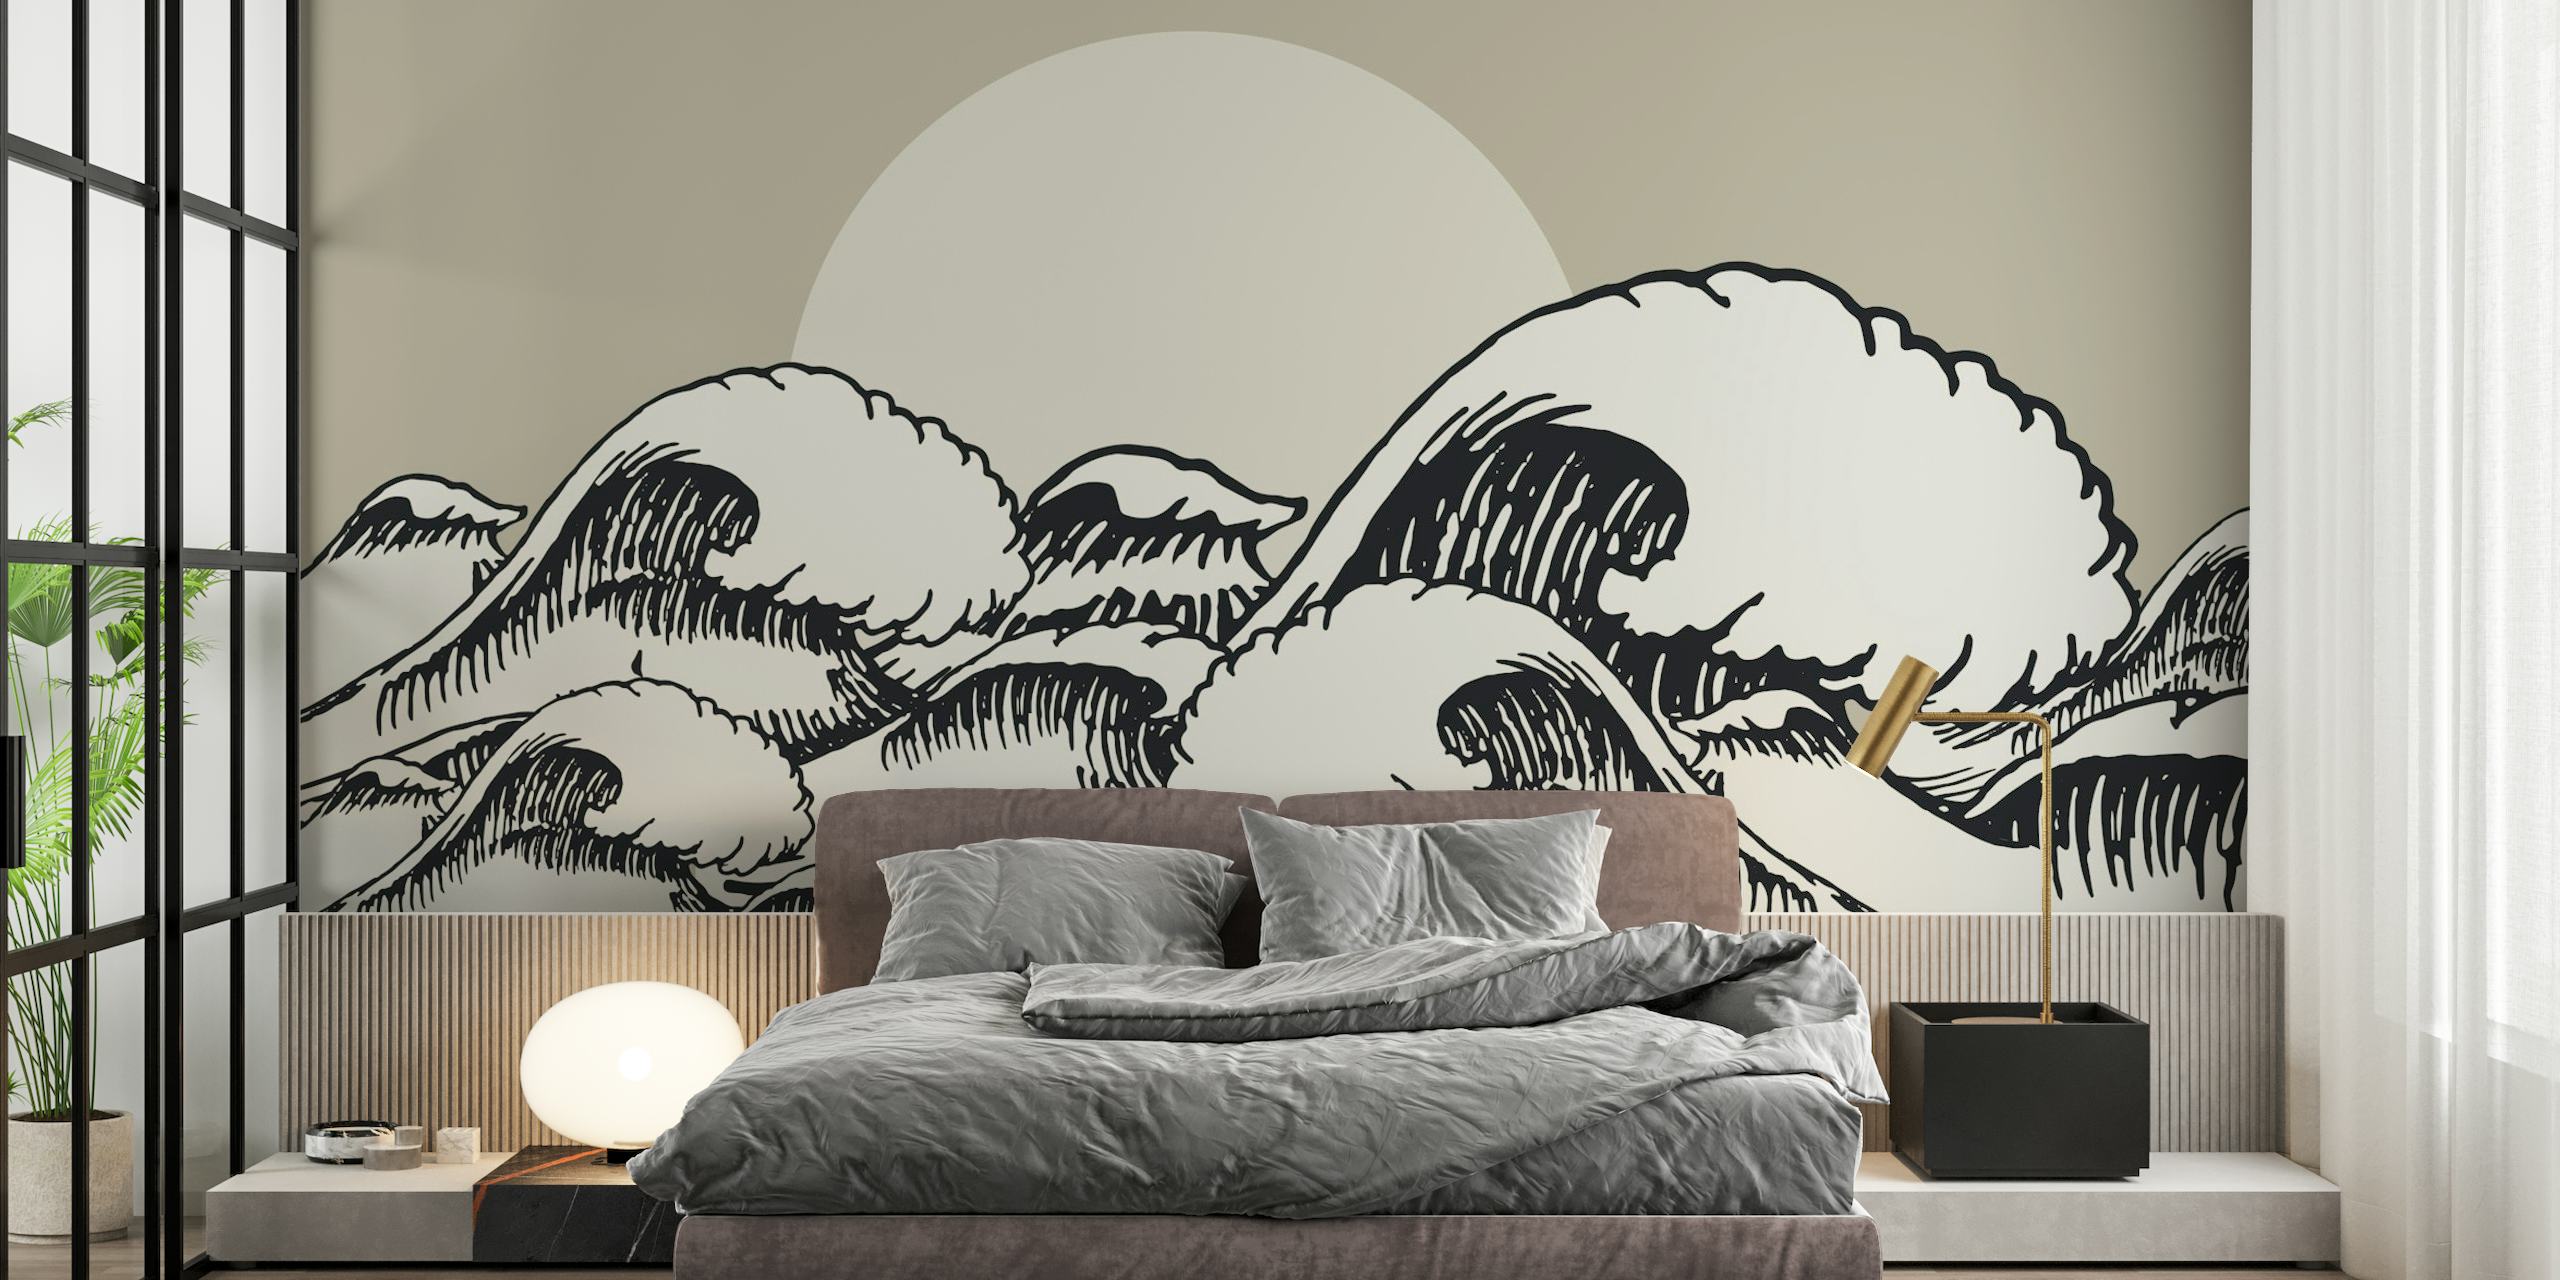 Ocean Sun Black wall mural with monochrome waves and a pale sun